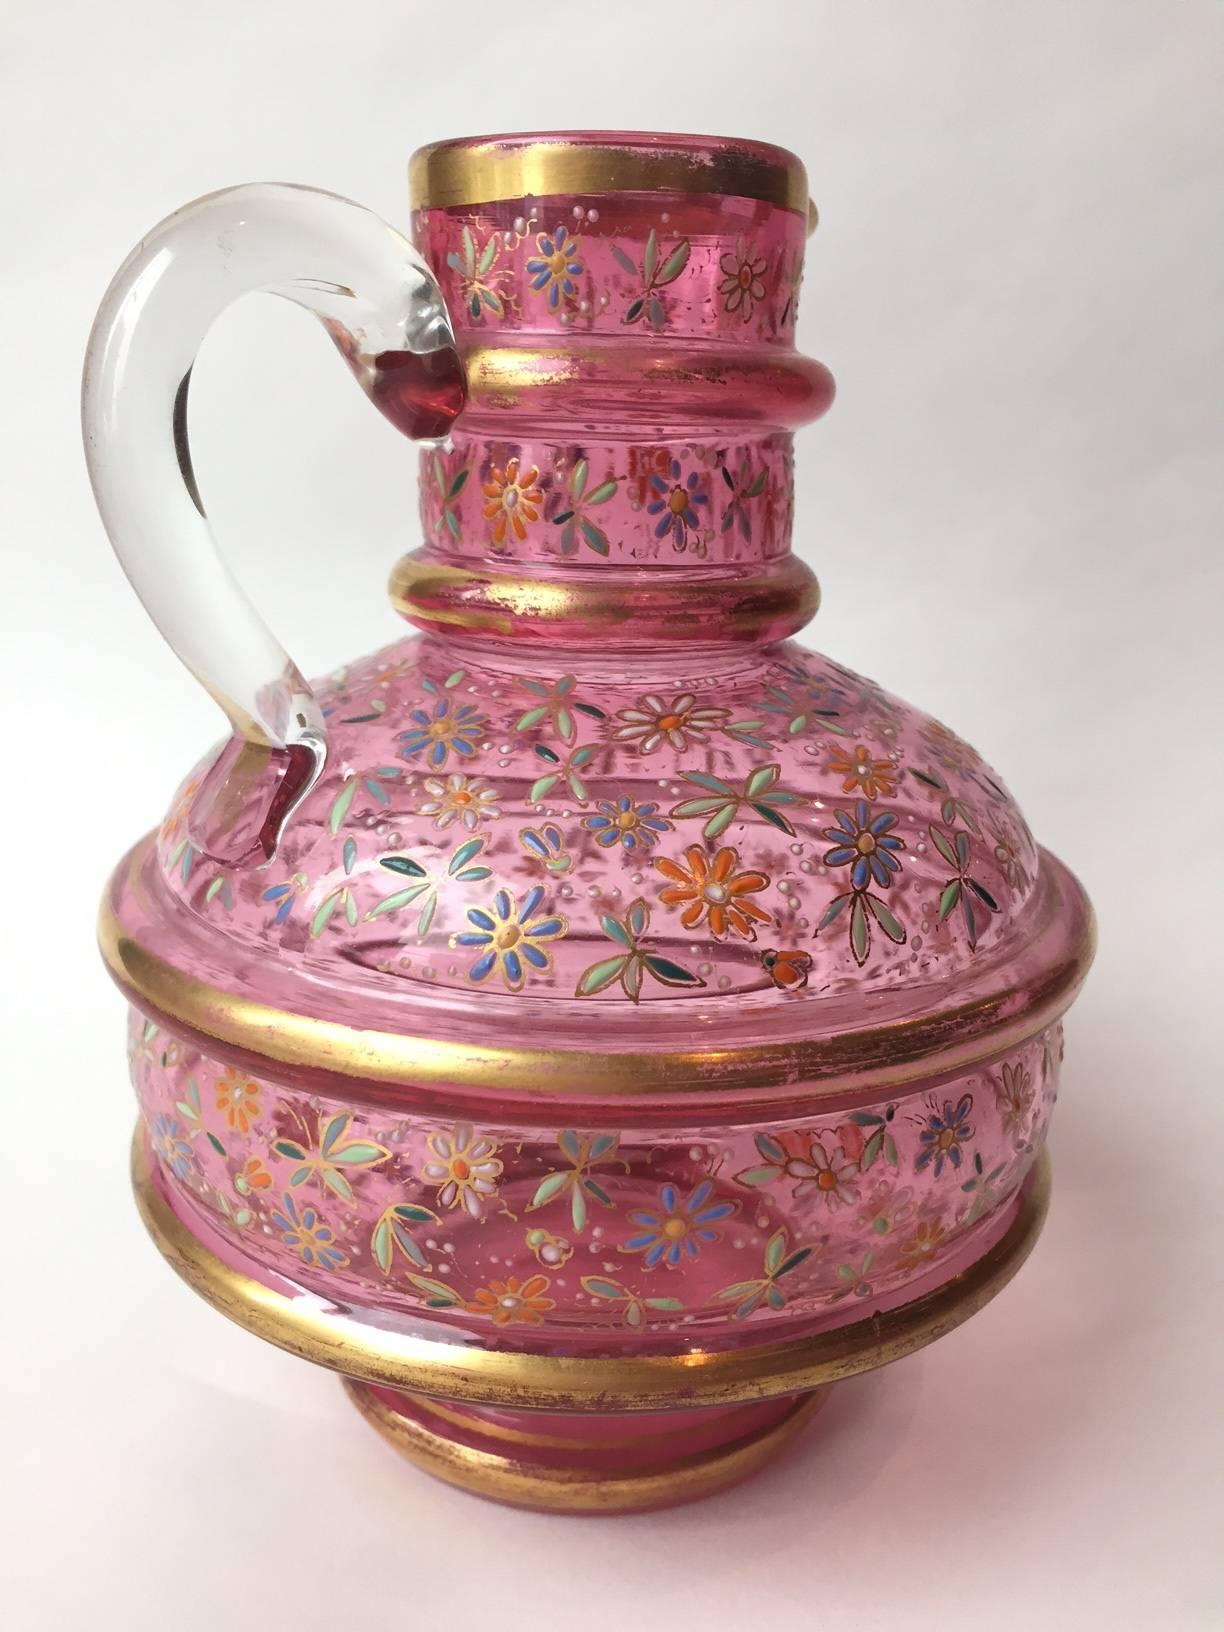 Art Nouveau Antique Moser Glass Pitcher Enamel and Gilt Decorated with Flowers, circa 1900 For Sale